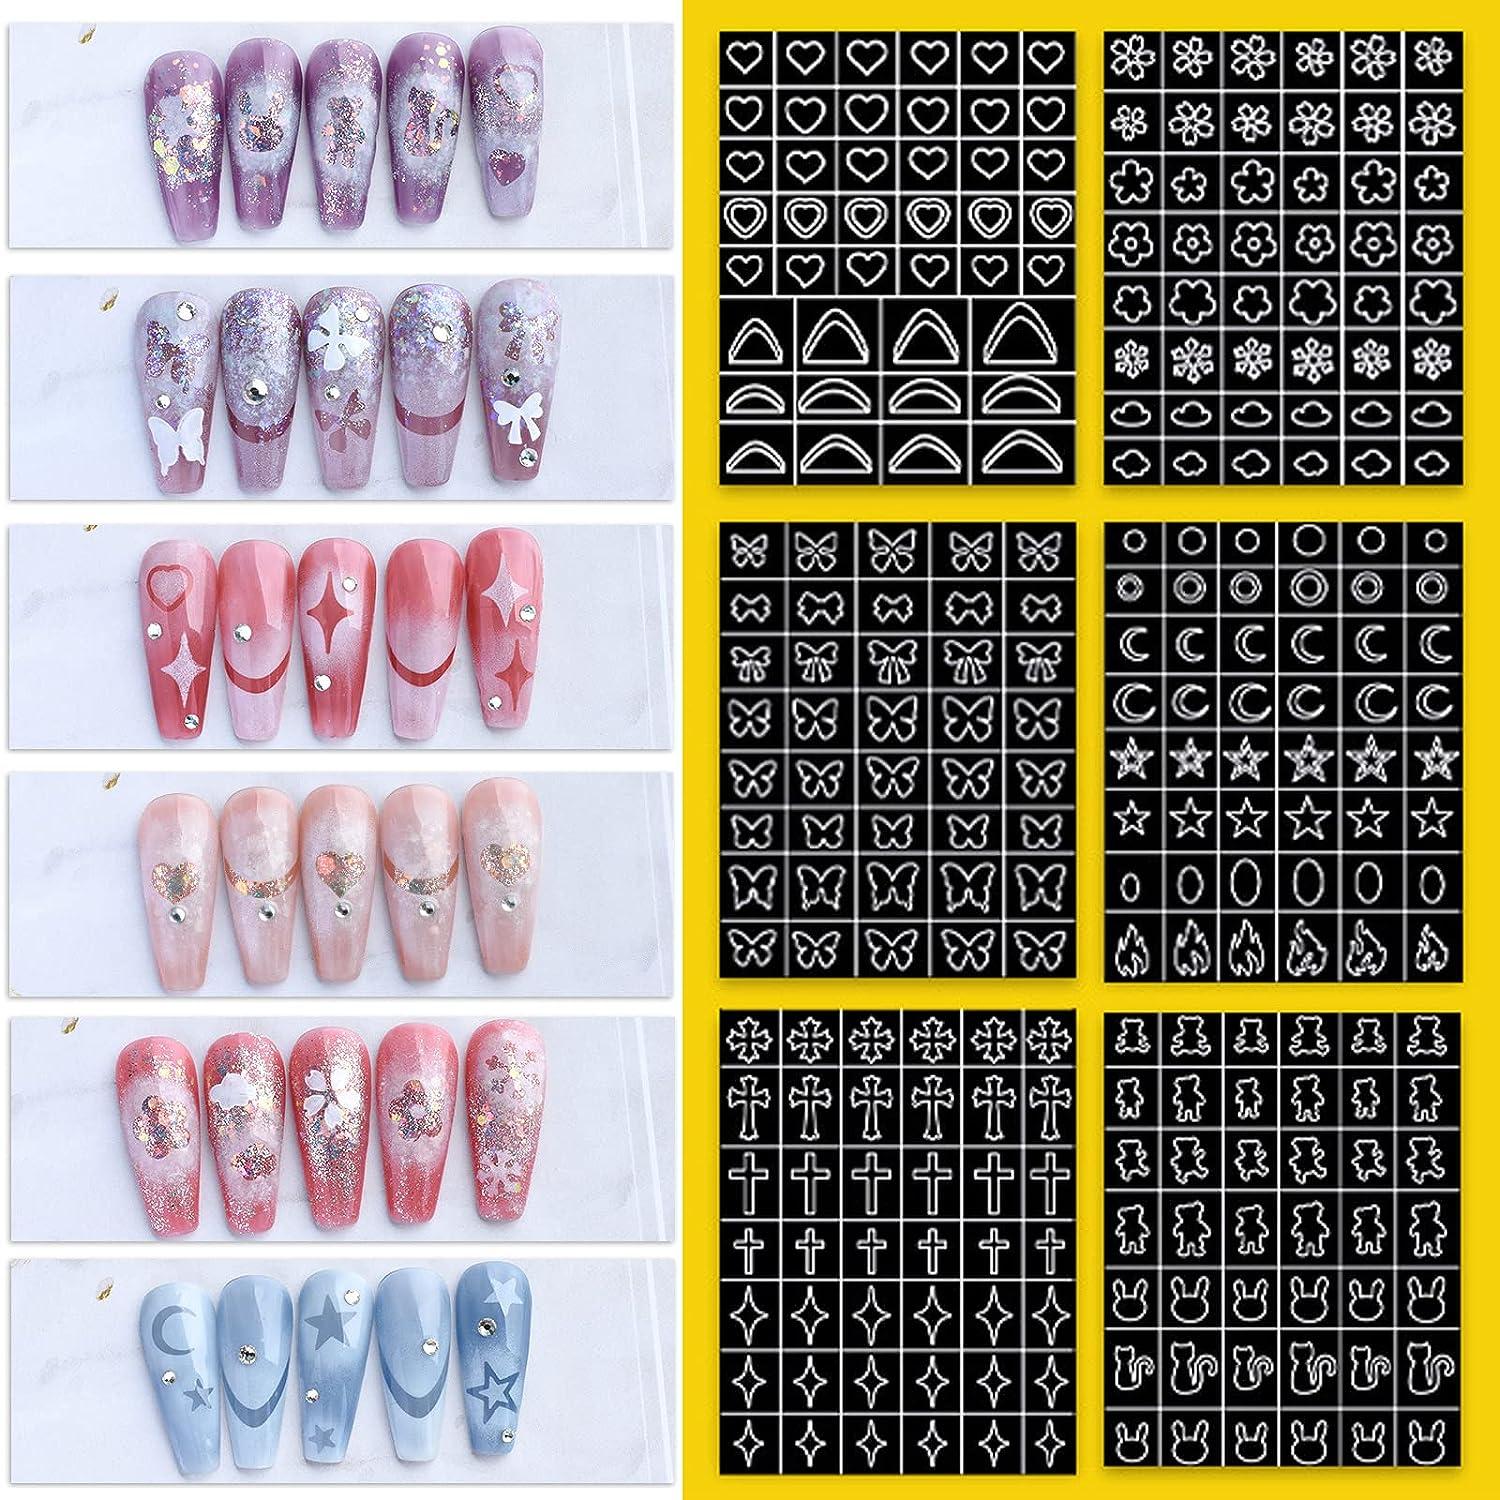 XEAOHESY 10 Sheets Airbrush Stencils Nail Stickers for Nails Self-Adhesive  Heart Butterfly Flower Moon Star Flame French Tip Nail Decals Stencils Tool